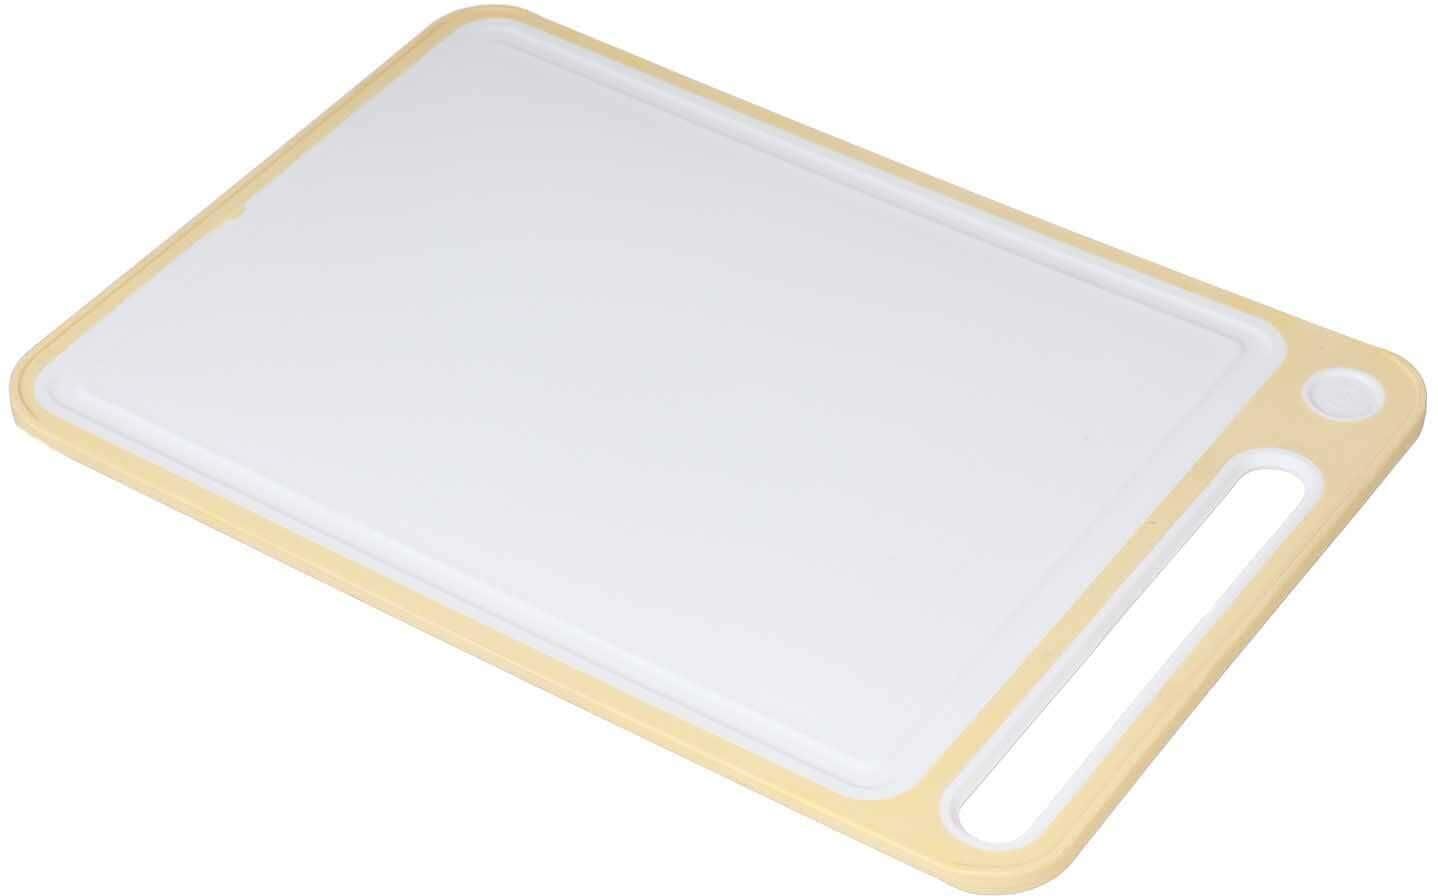 Get Rectangular plastic Cutting Board, 36×25 cm - White Yellow with best offers | Raneen.com